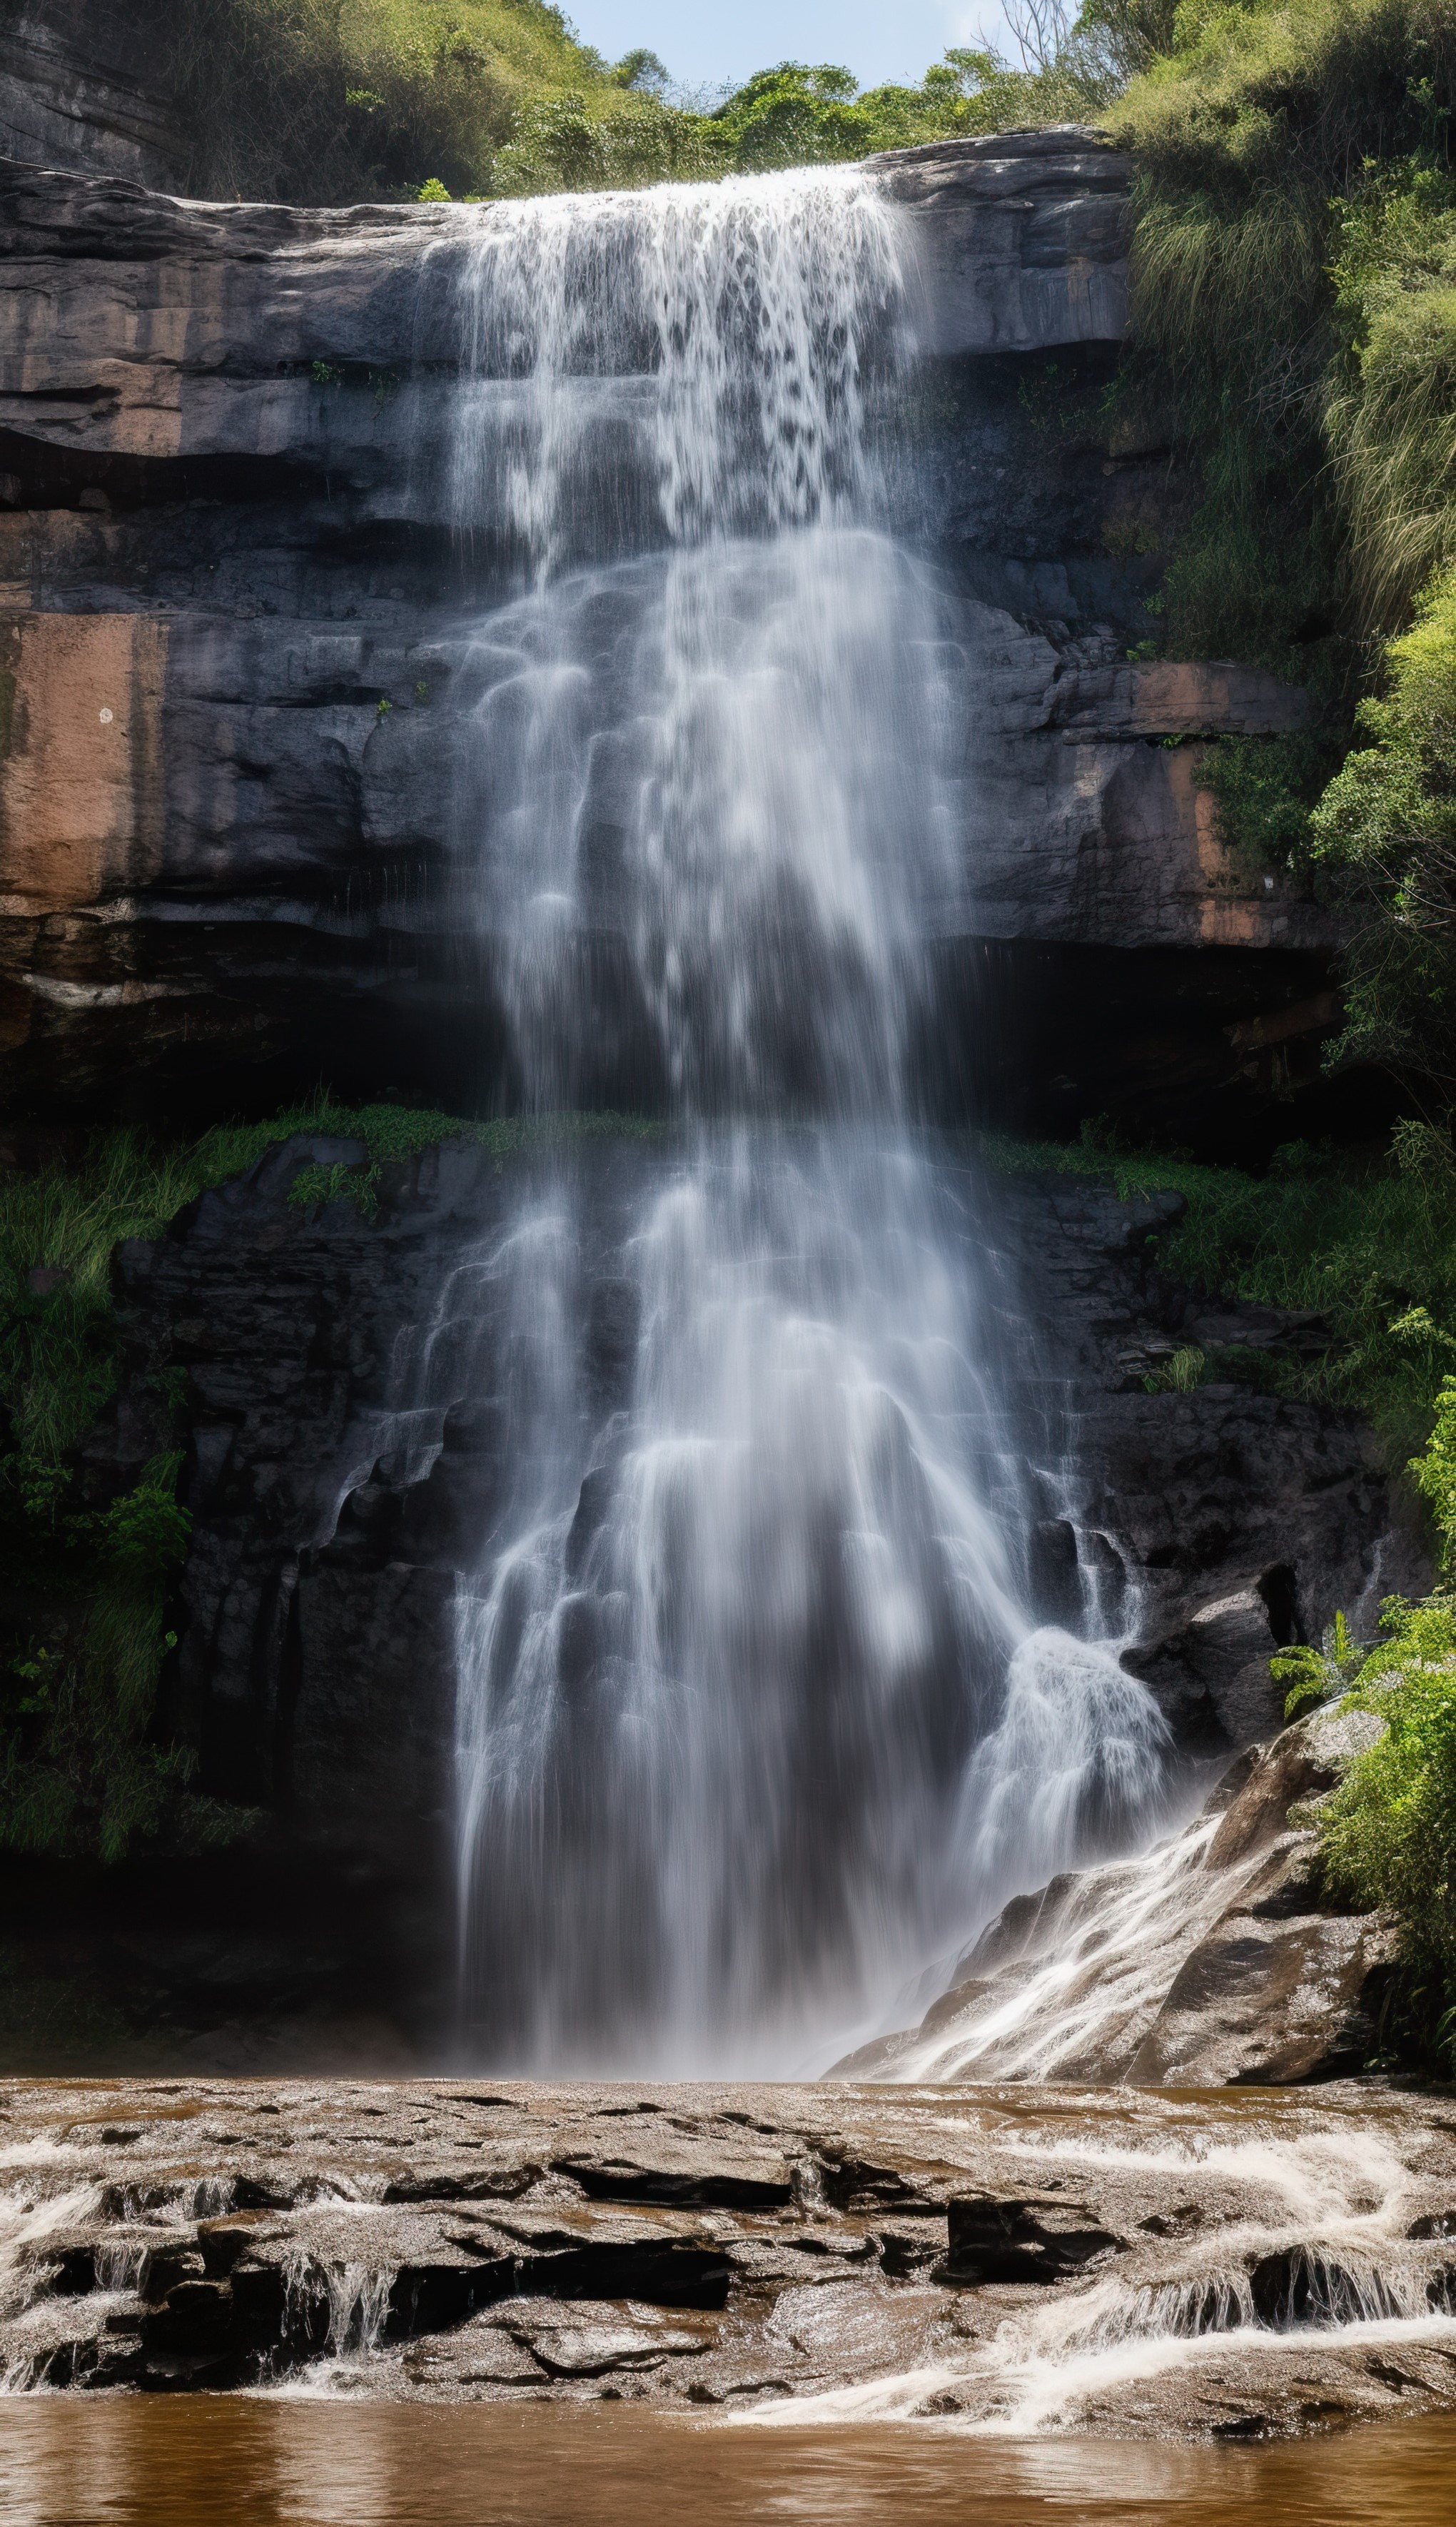 Waterfall cascading down a rocky cliff face